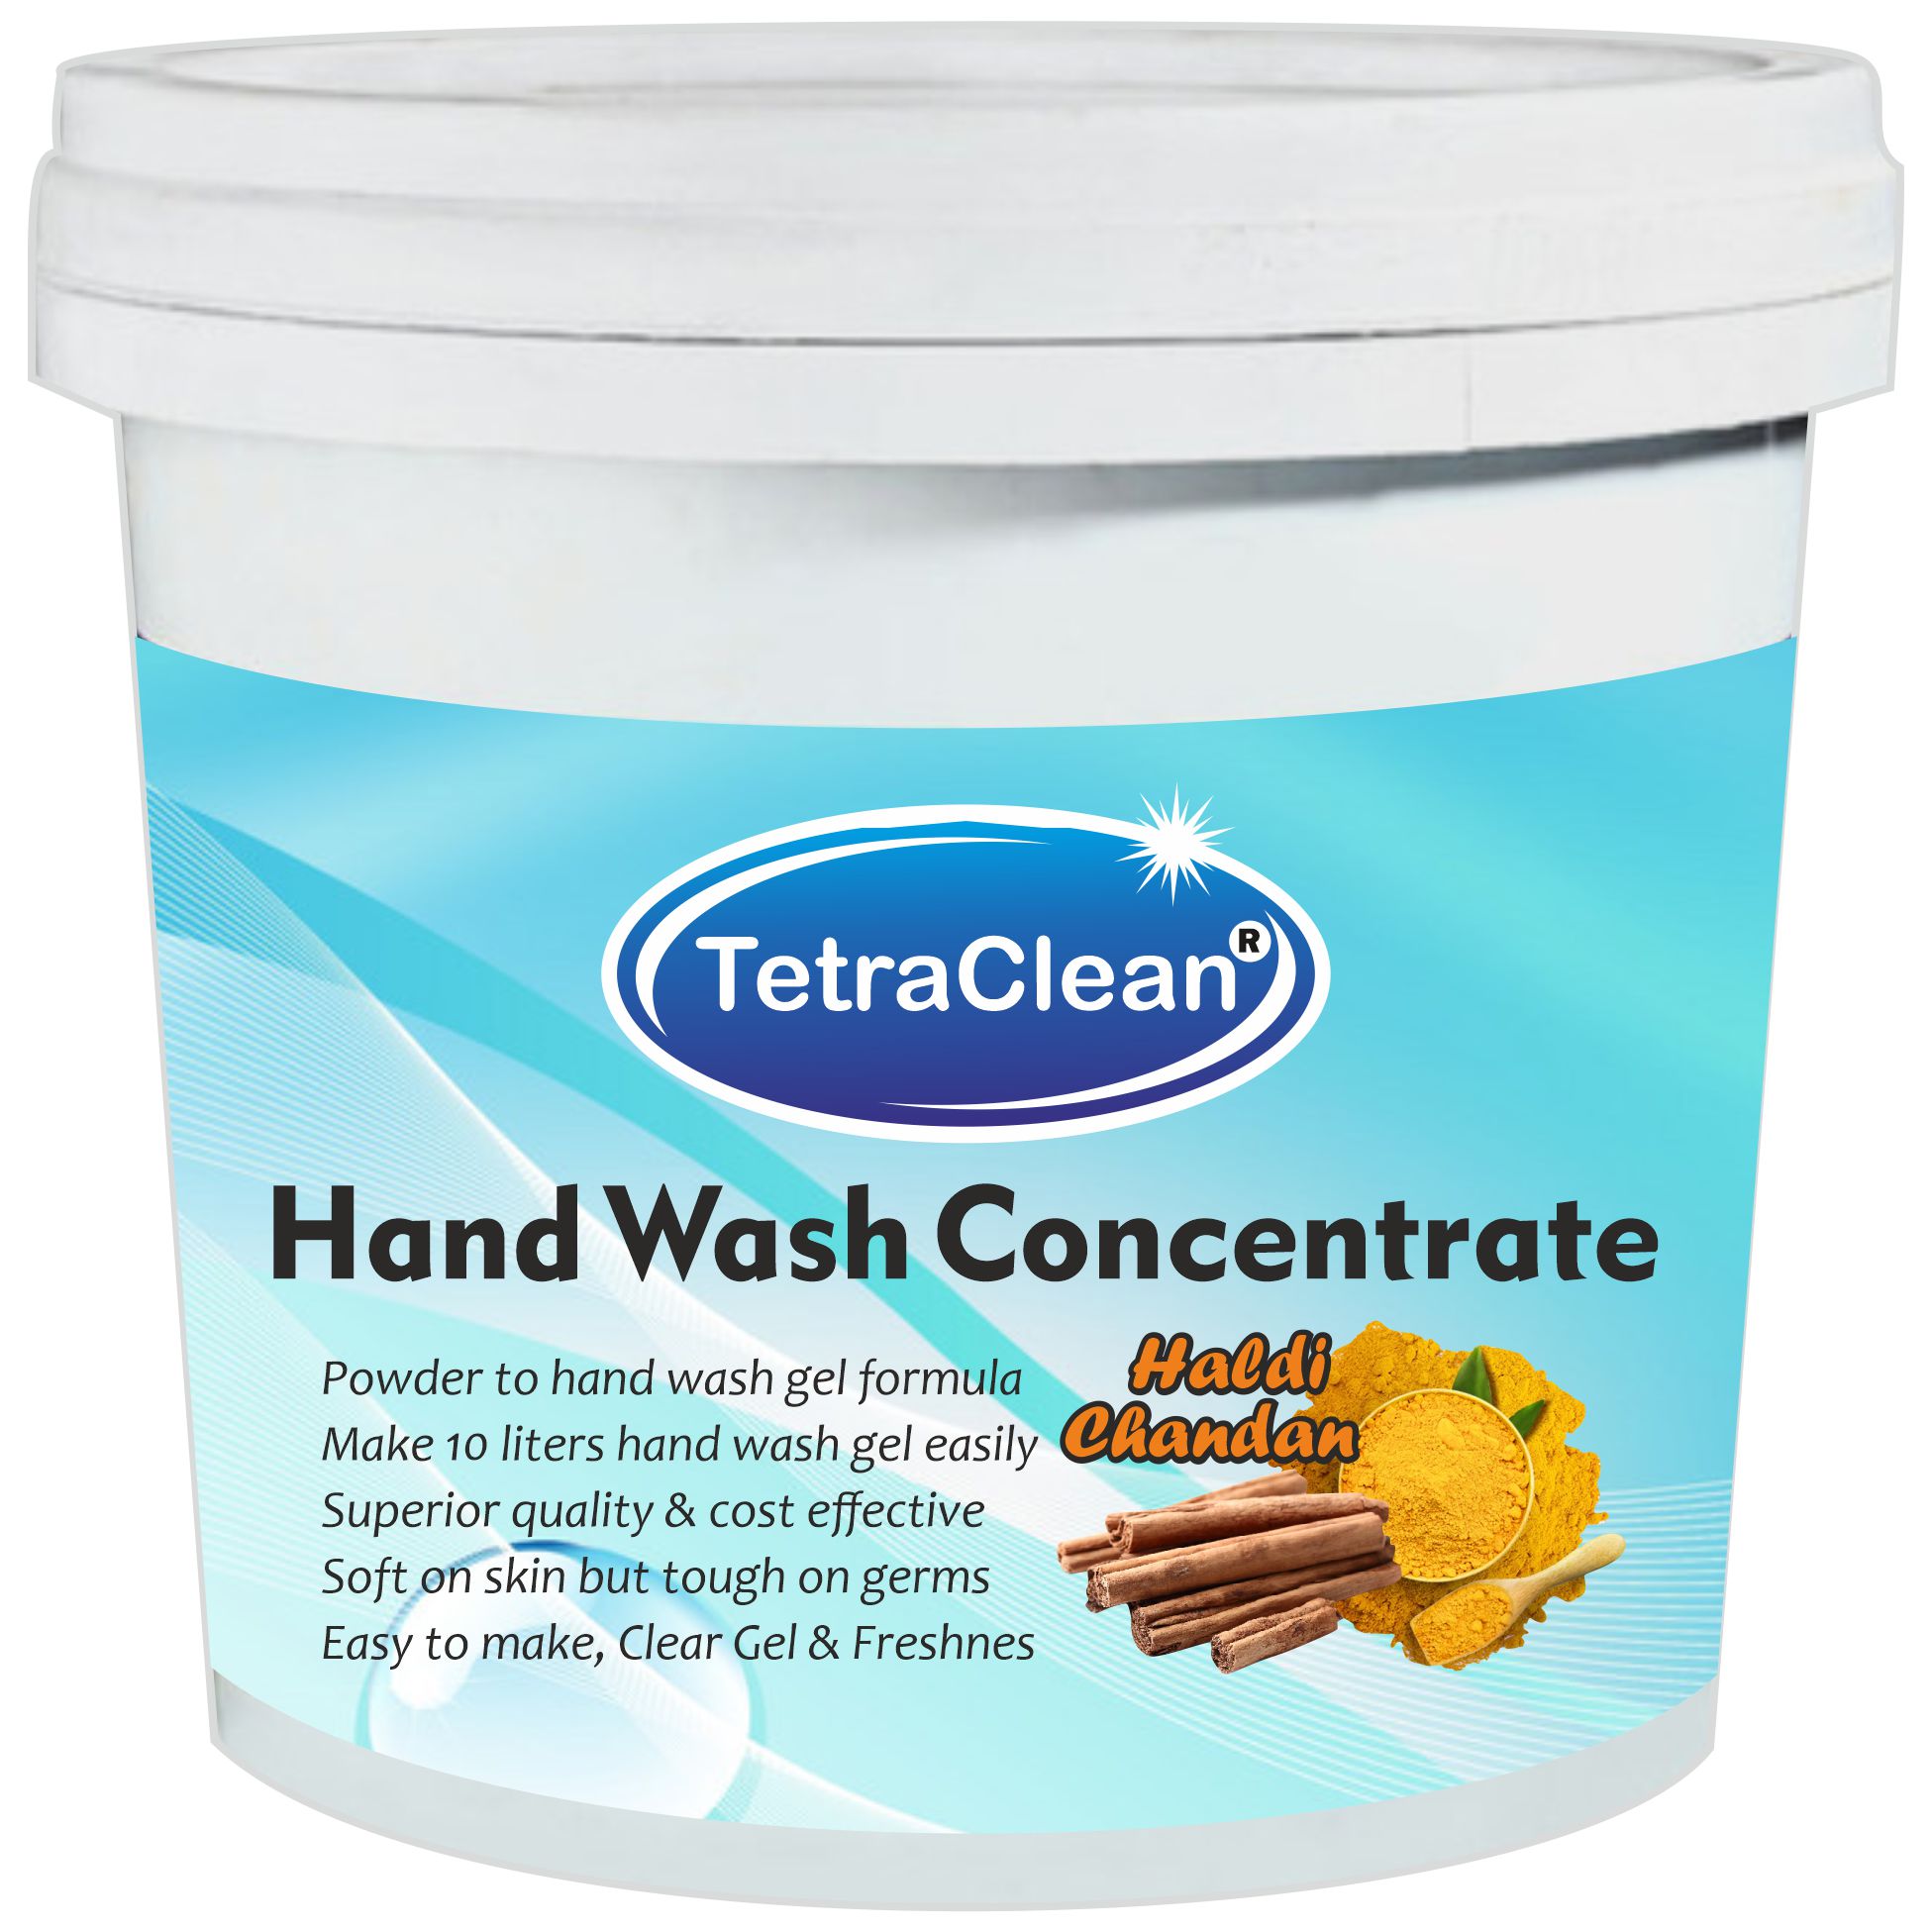 TetraClean Hand Wash Concentrate Powder - 500gm packing - with haldi chandan fragrance